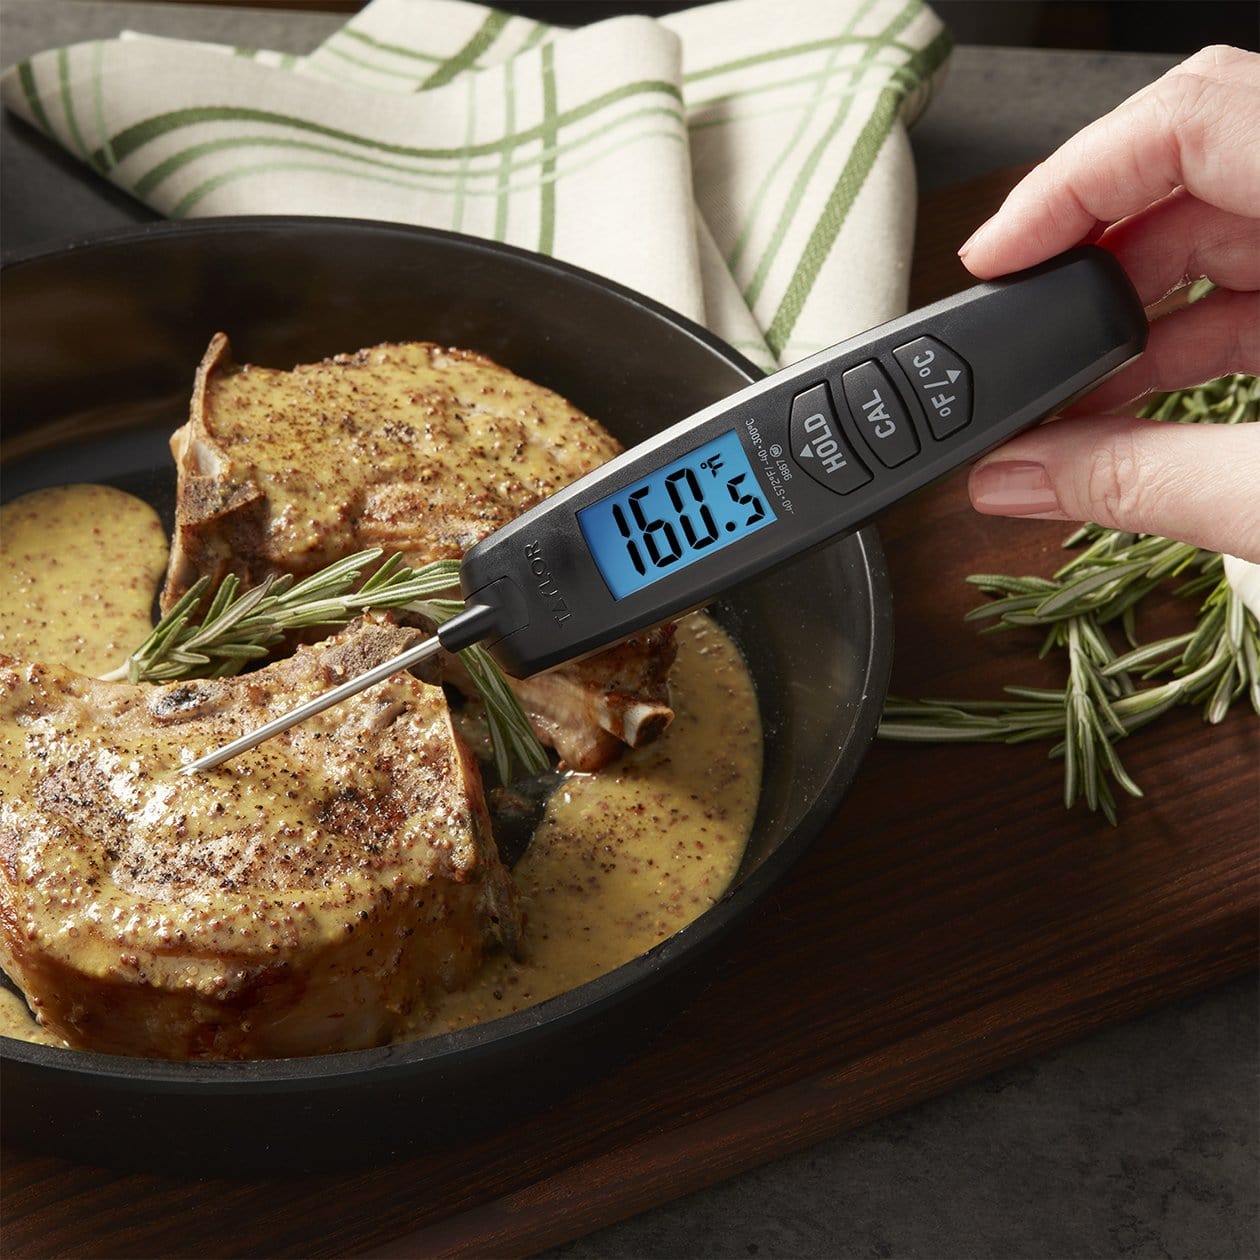 Taylor 3518N Cooking Thermometer, Digital Type, 32° to 392°F